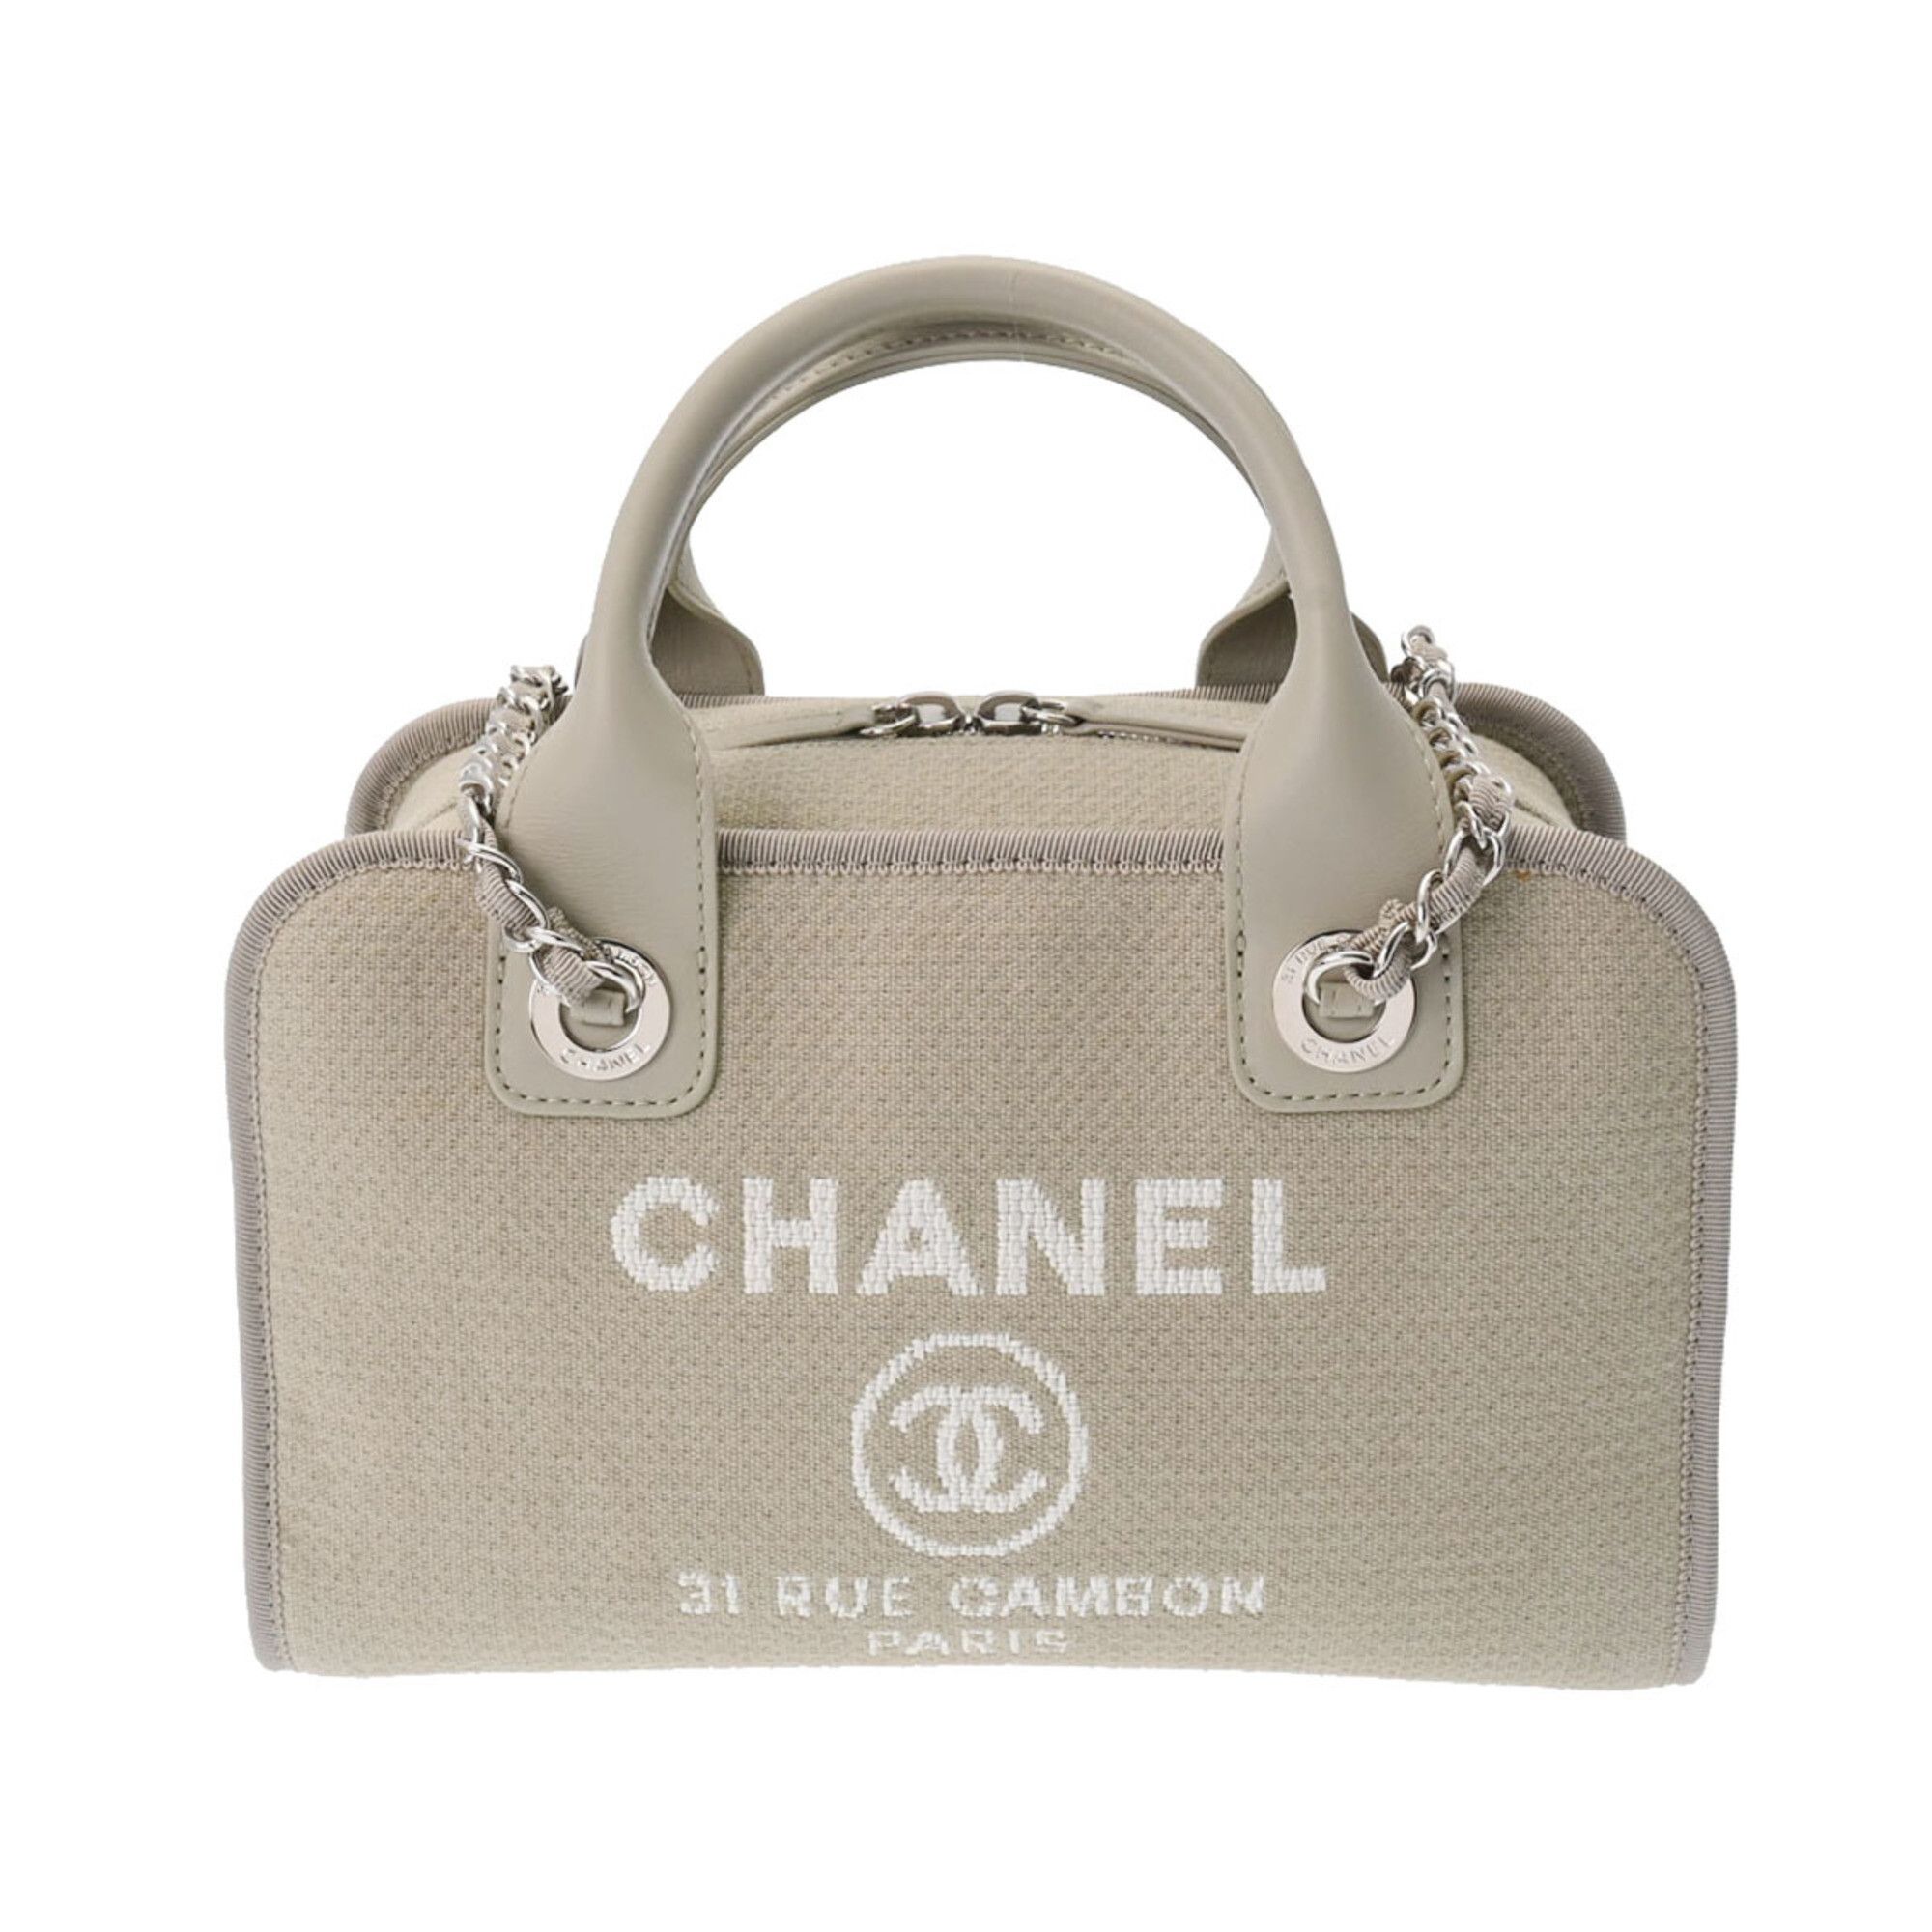 Chanel - Deauville Bowler Bag - Grey Fabric - SHW - Pre Loved